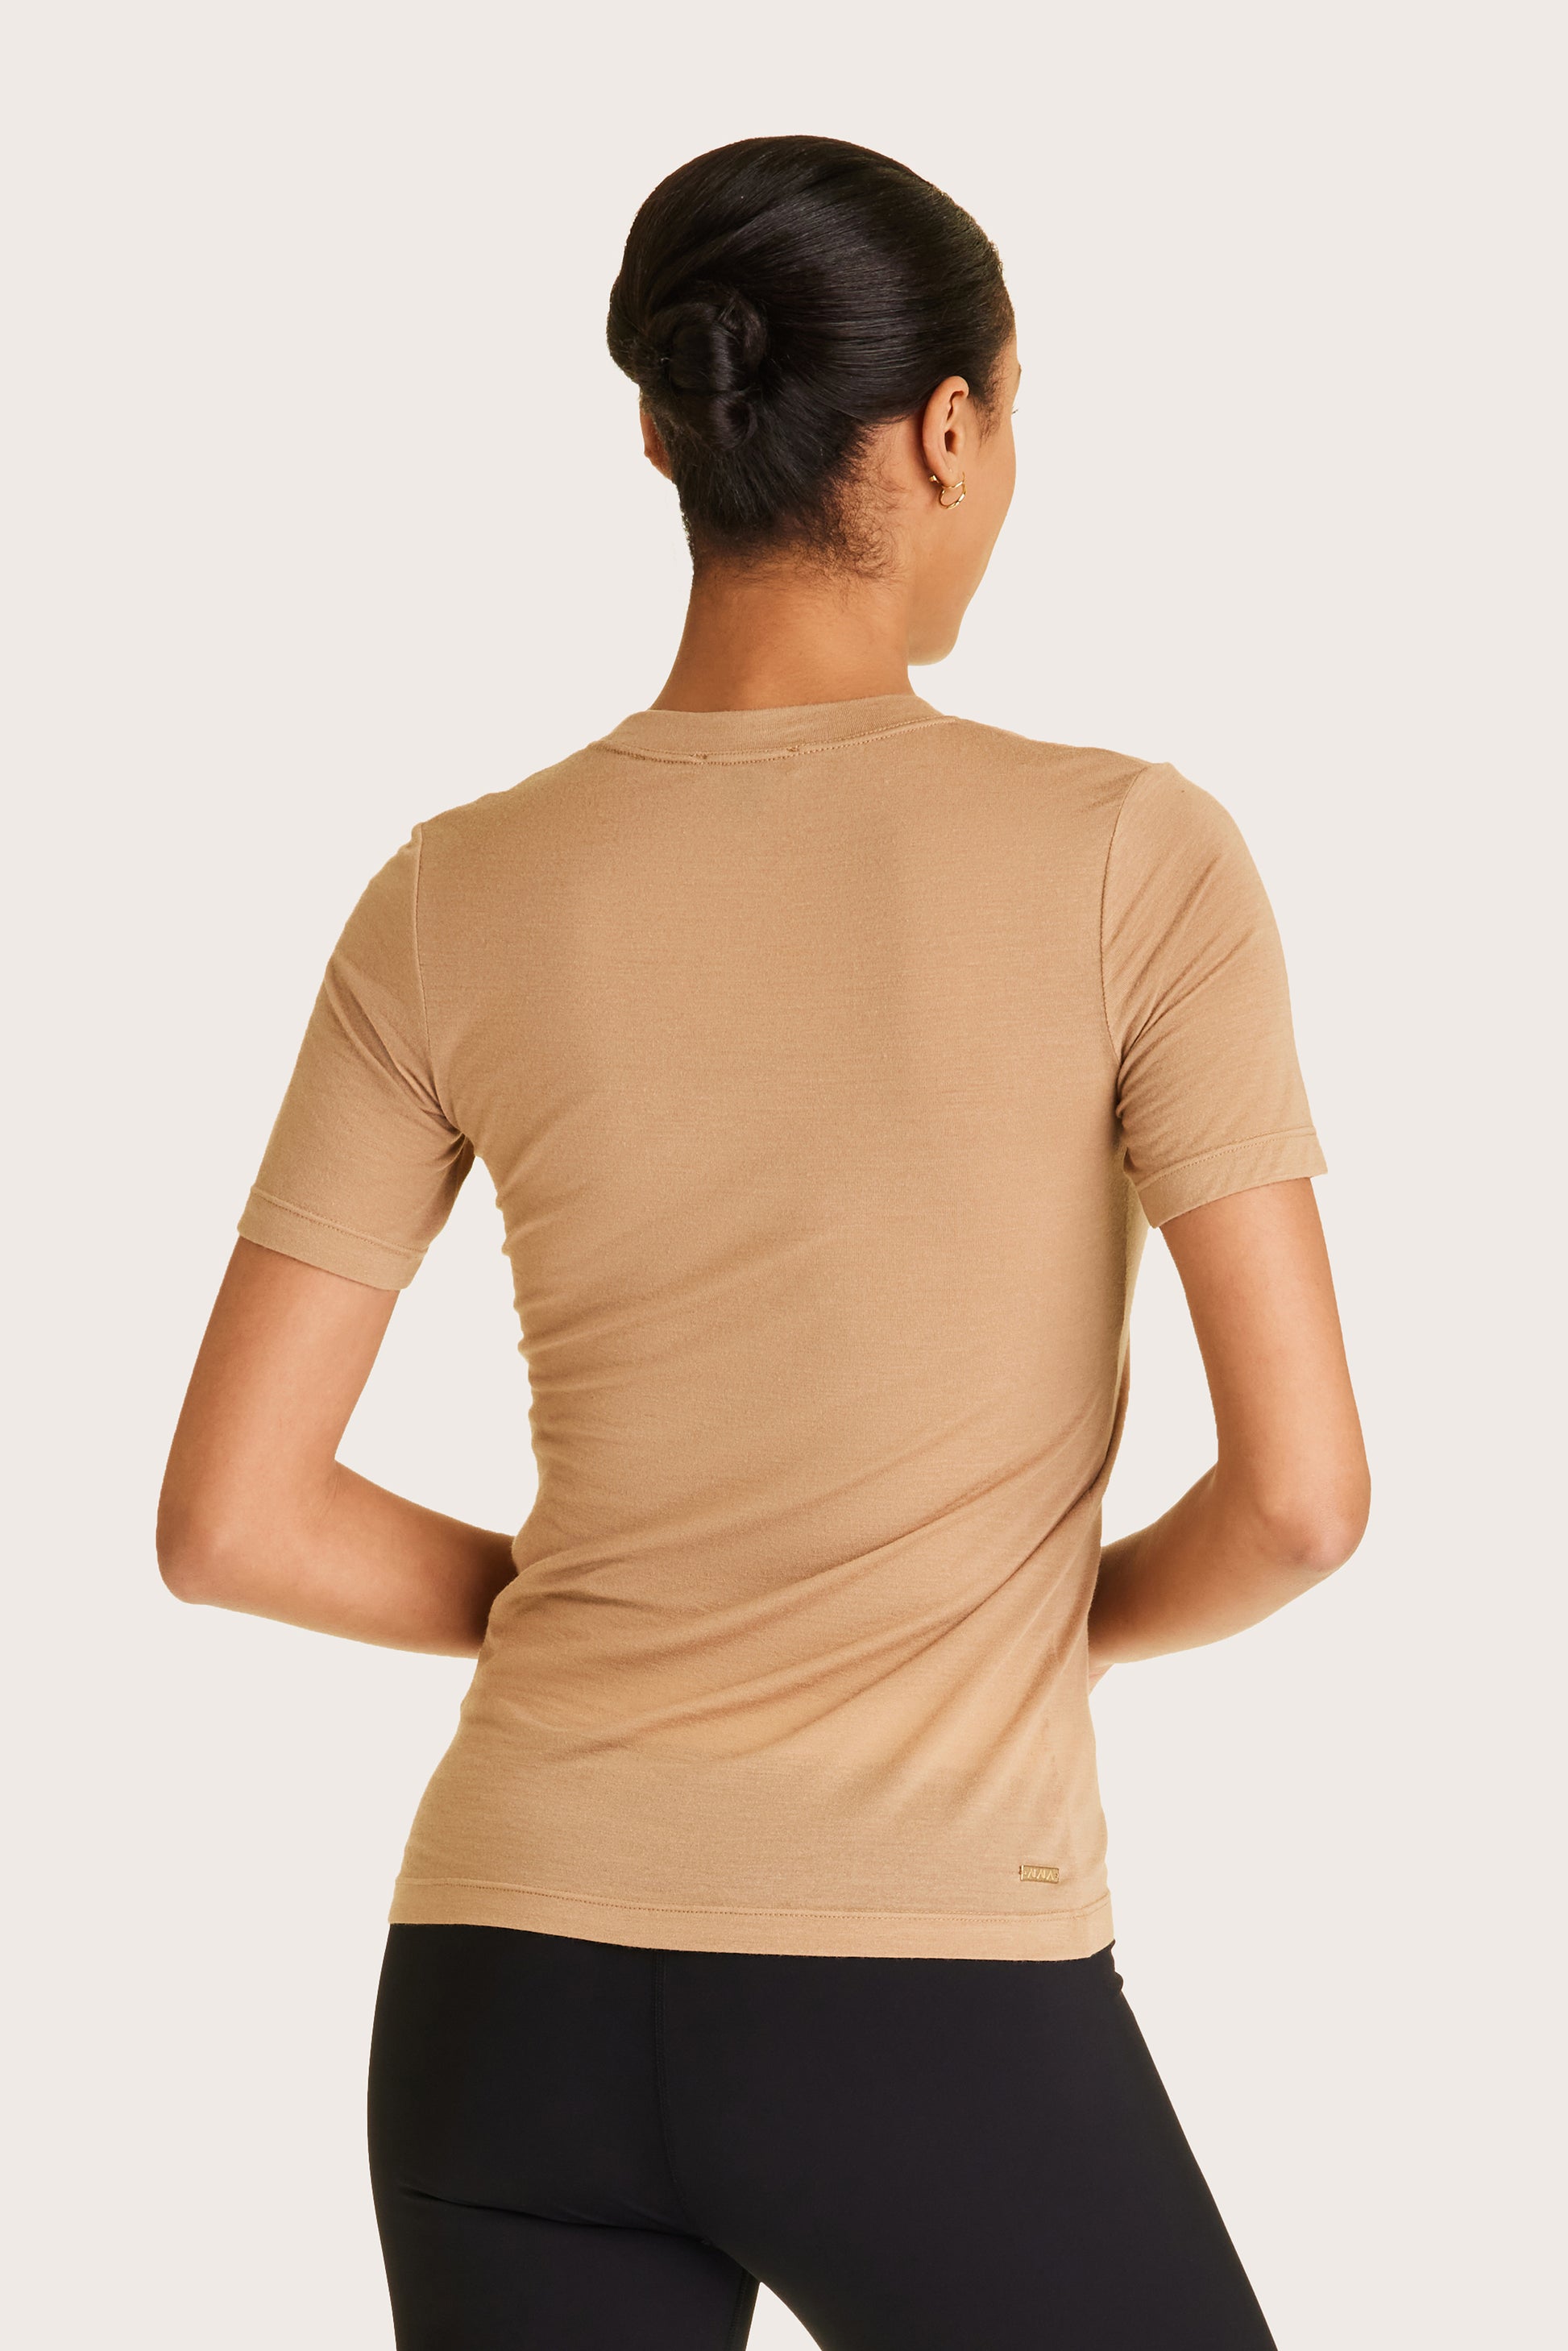 Alala women's Washable Cashmere Tee in camel